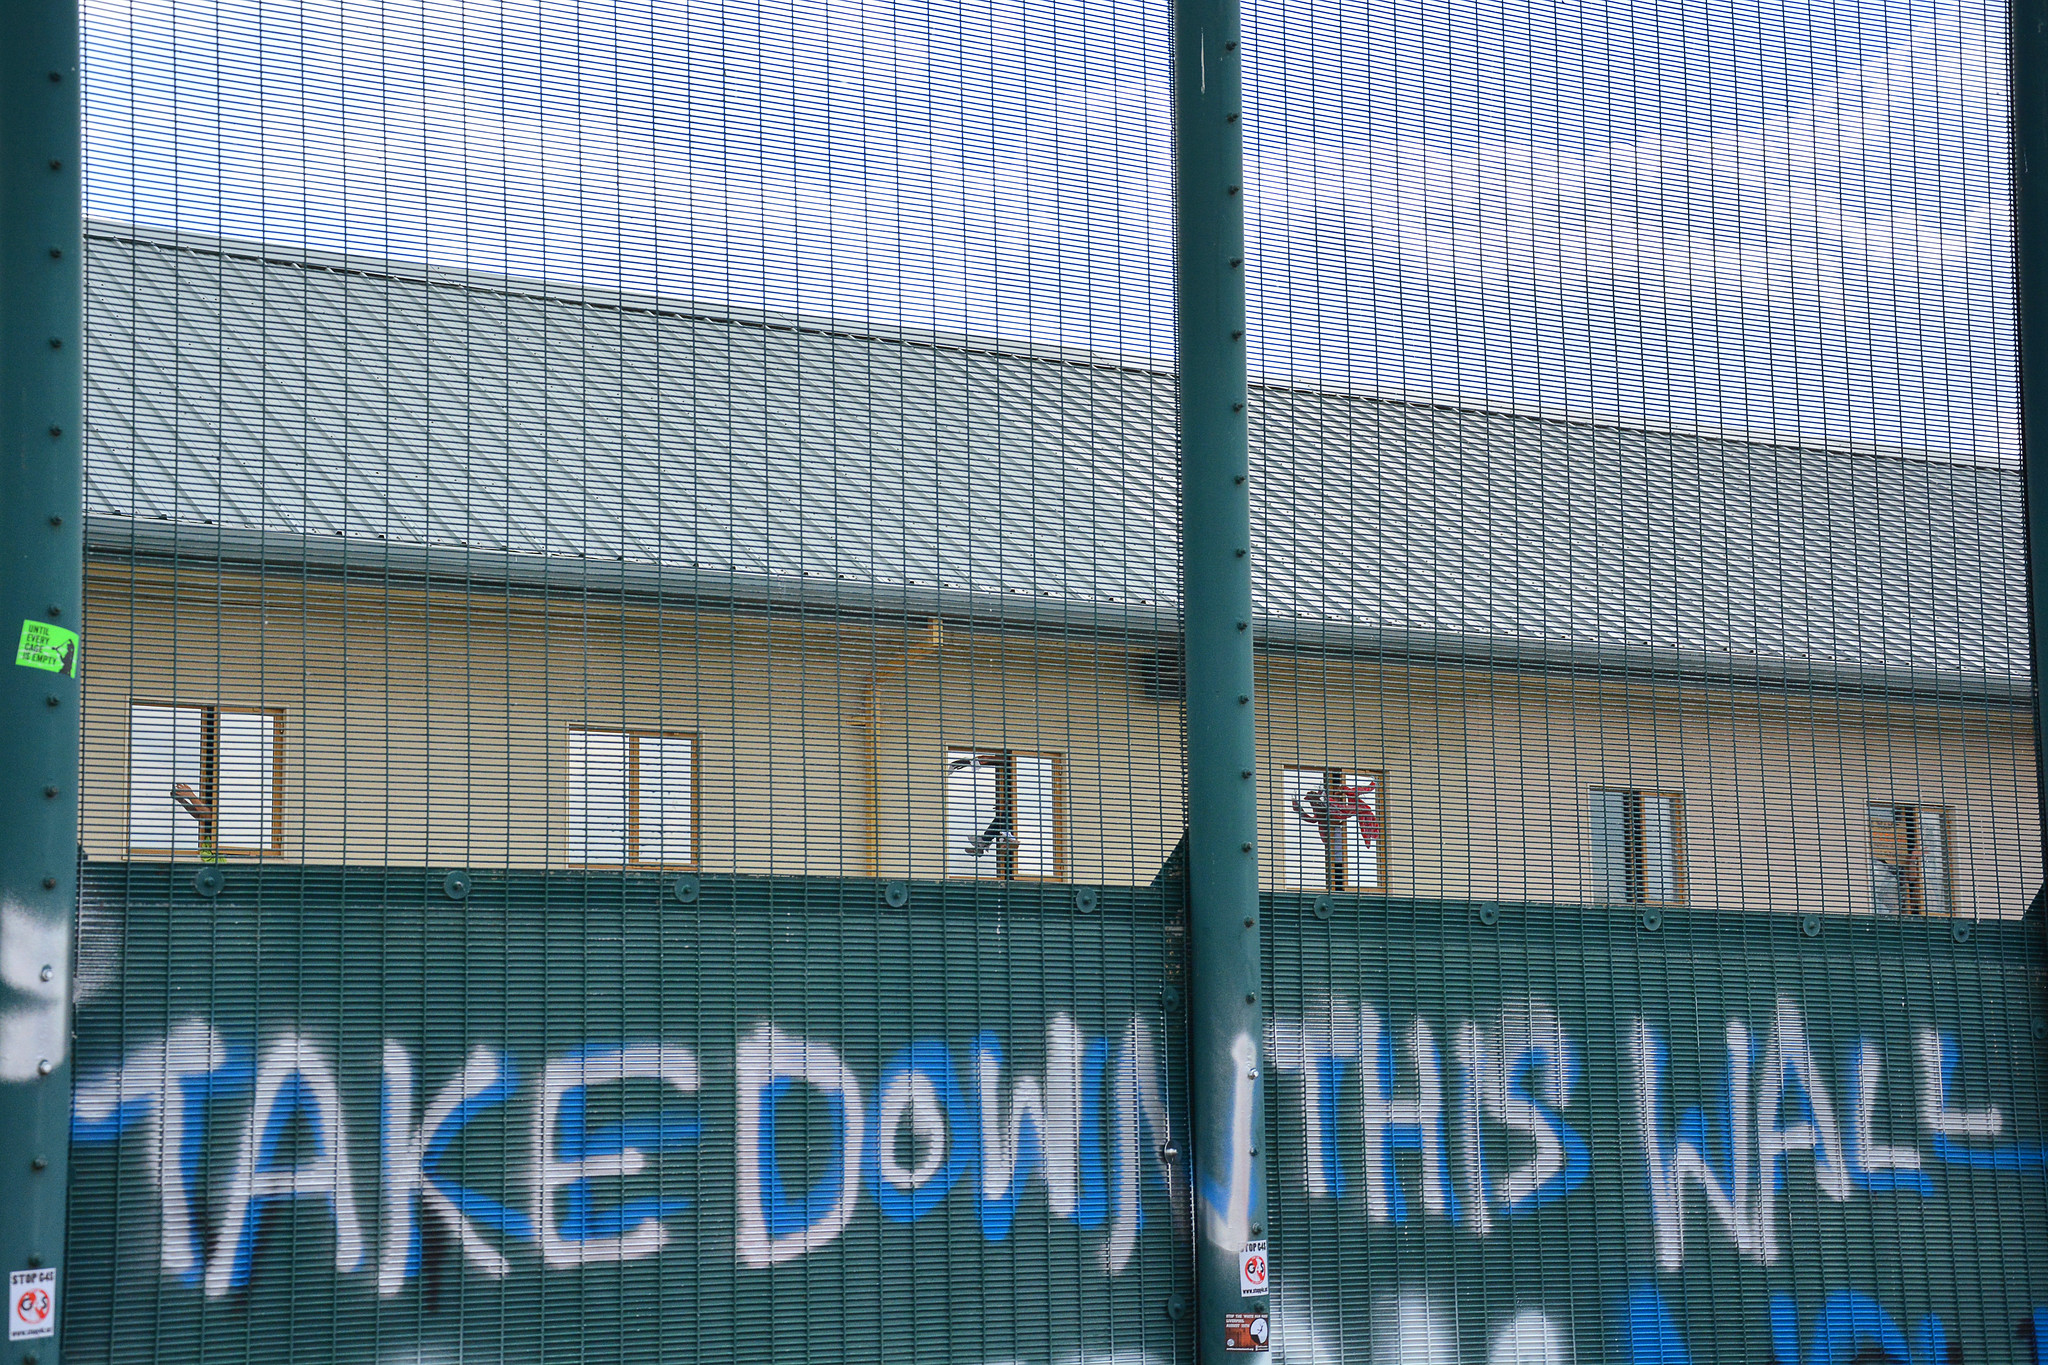 Photo of the fence outside Yarl's Wood with graffiti saying "Take Down This Wall" and people detained inside putting their arms out the window in the background.